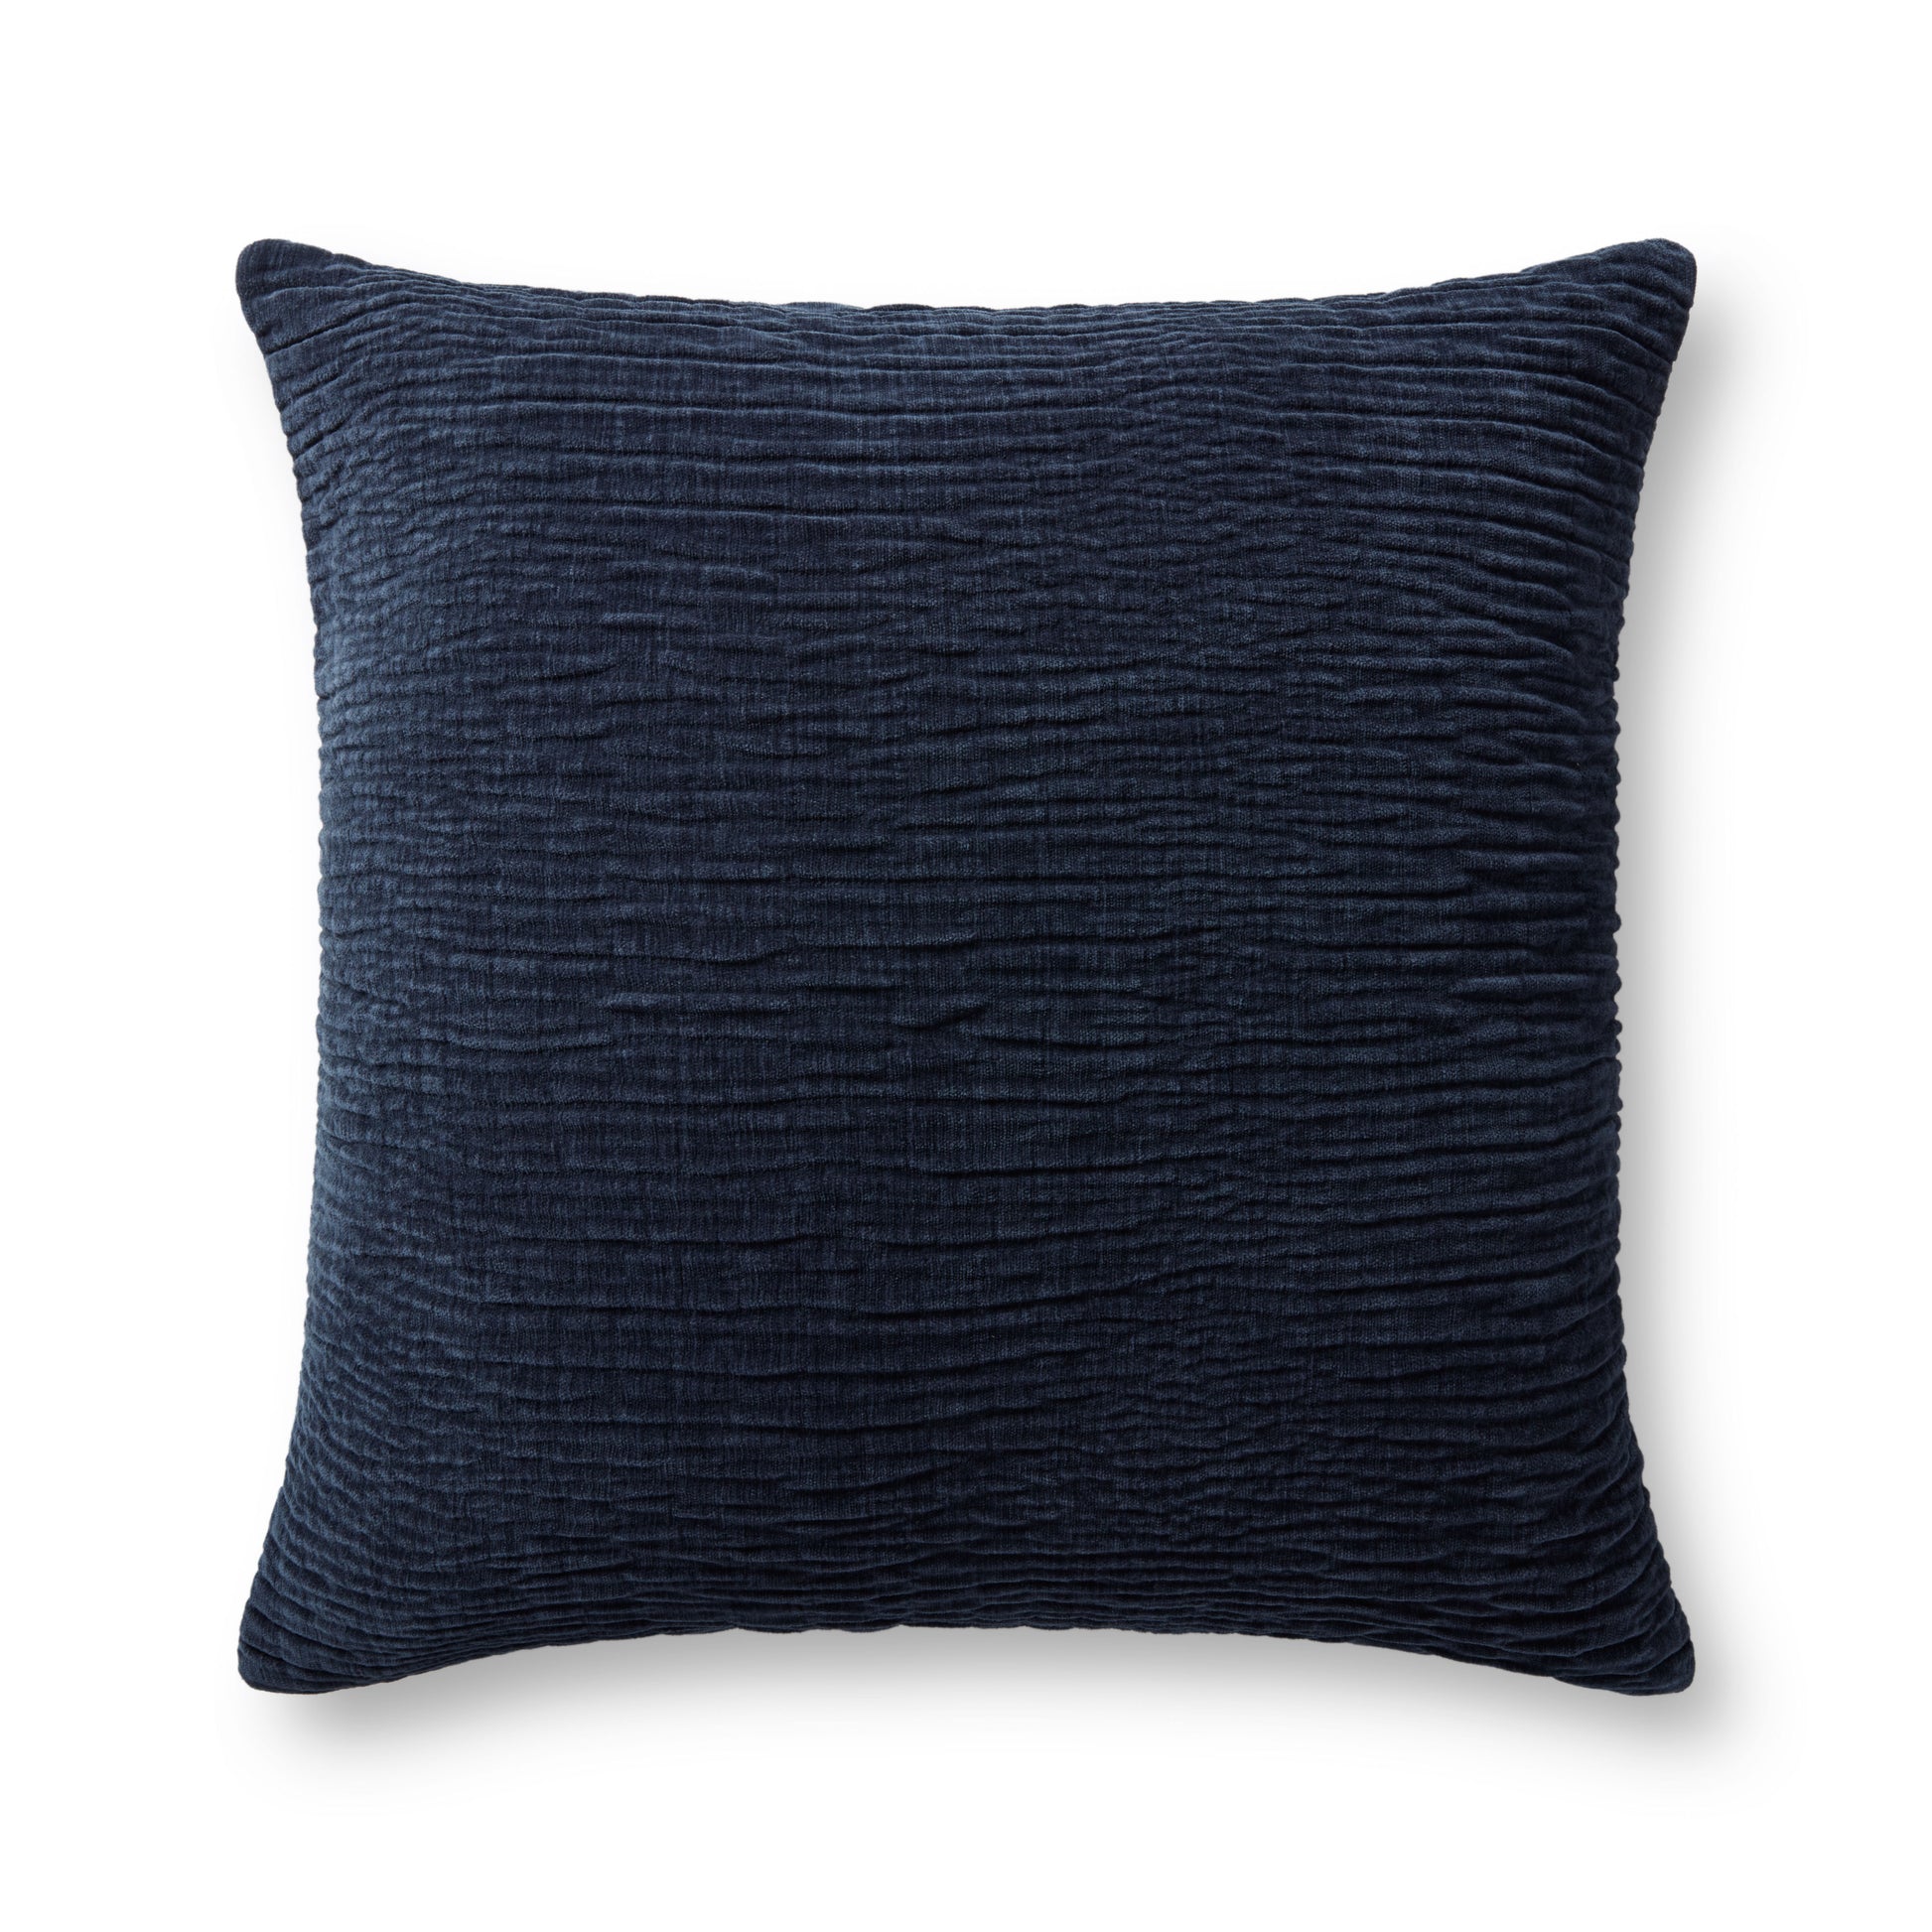 Photo of a pillow;  Navy 22'' x 22'' Cover w/Poly Pillow